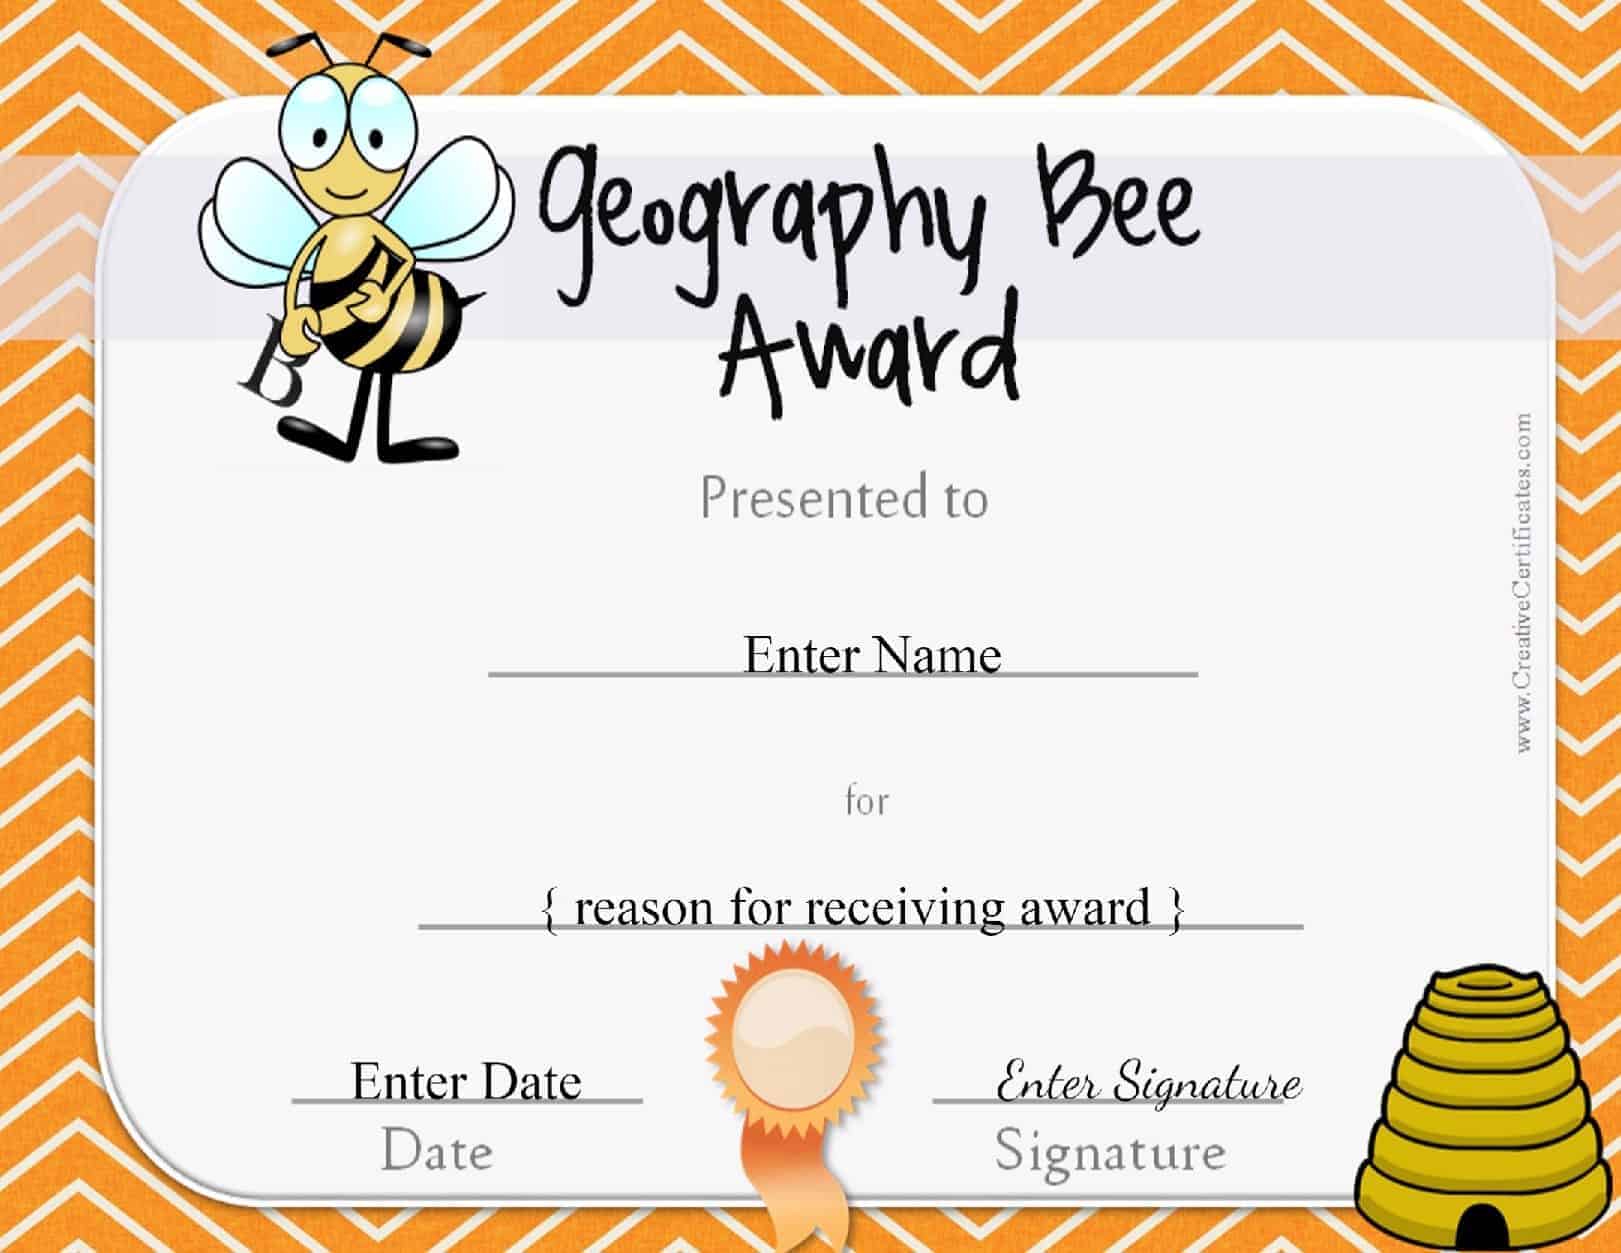 free-geography-bee-certificates-download